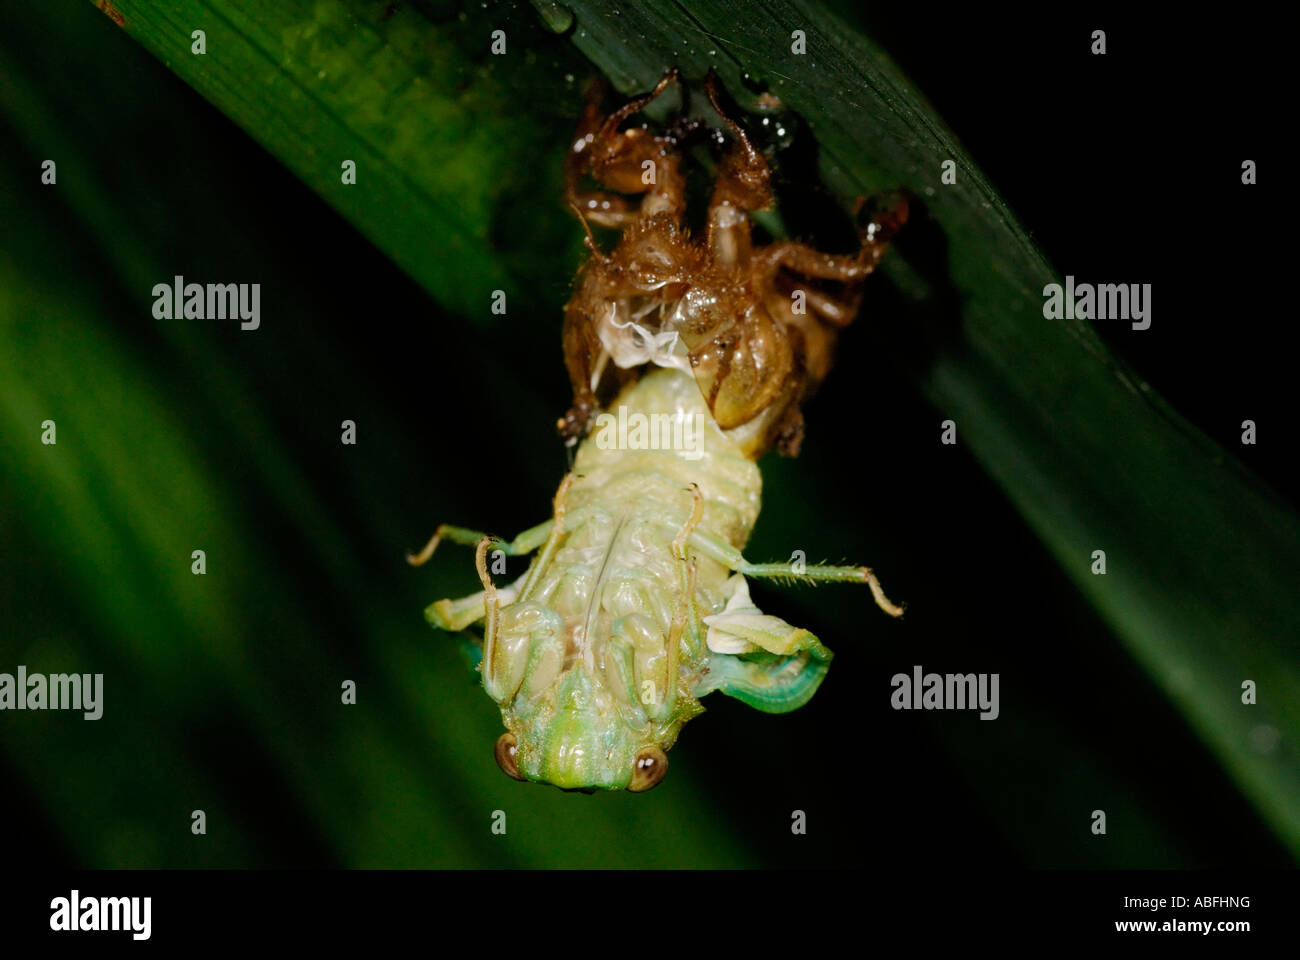 A cicada freshly emerged from its exoskeleton in lowland rainforest near Chilamate Costa Rica Stock Photo